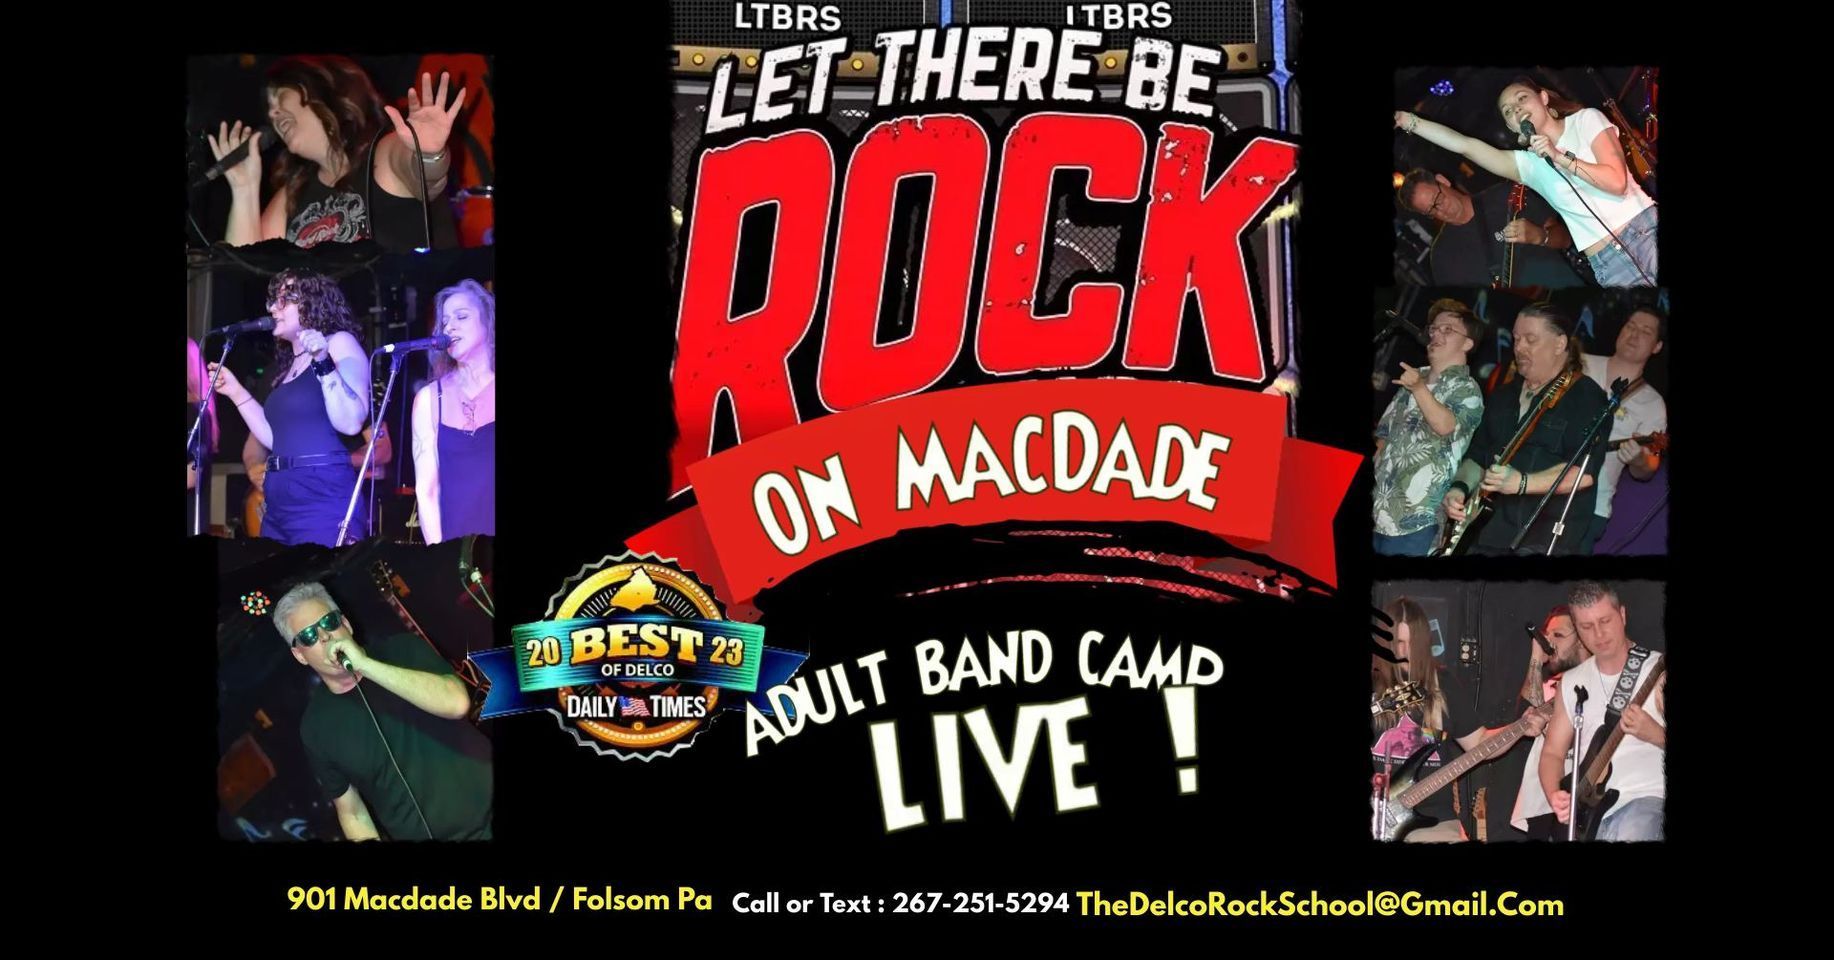 Let There Be Rock on MacDade, the best music school in Delco Adult Band Camp